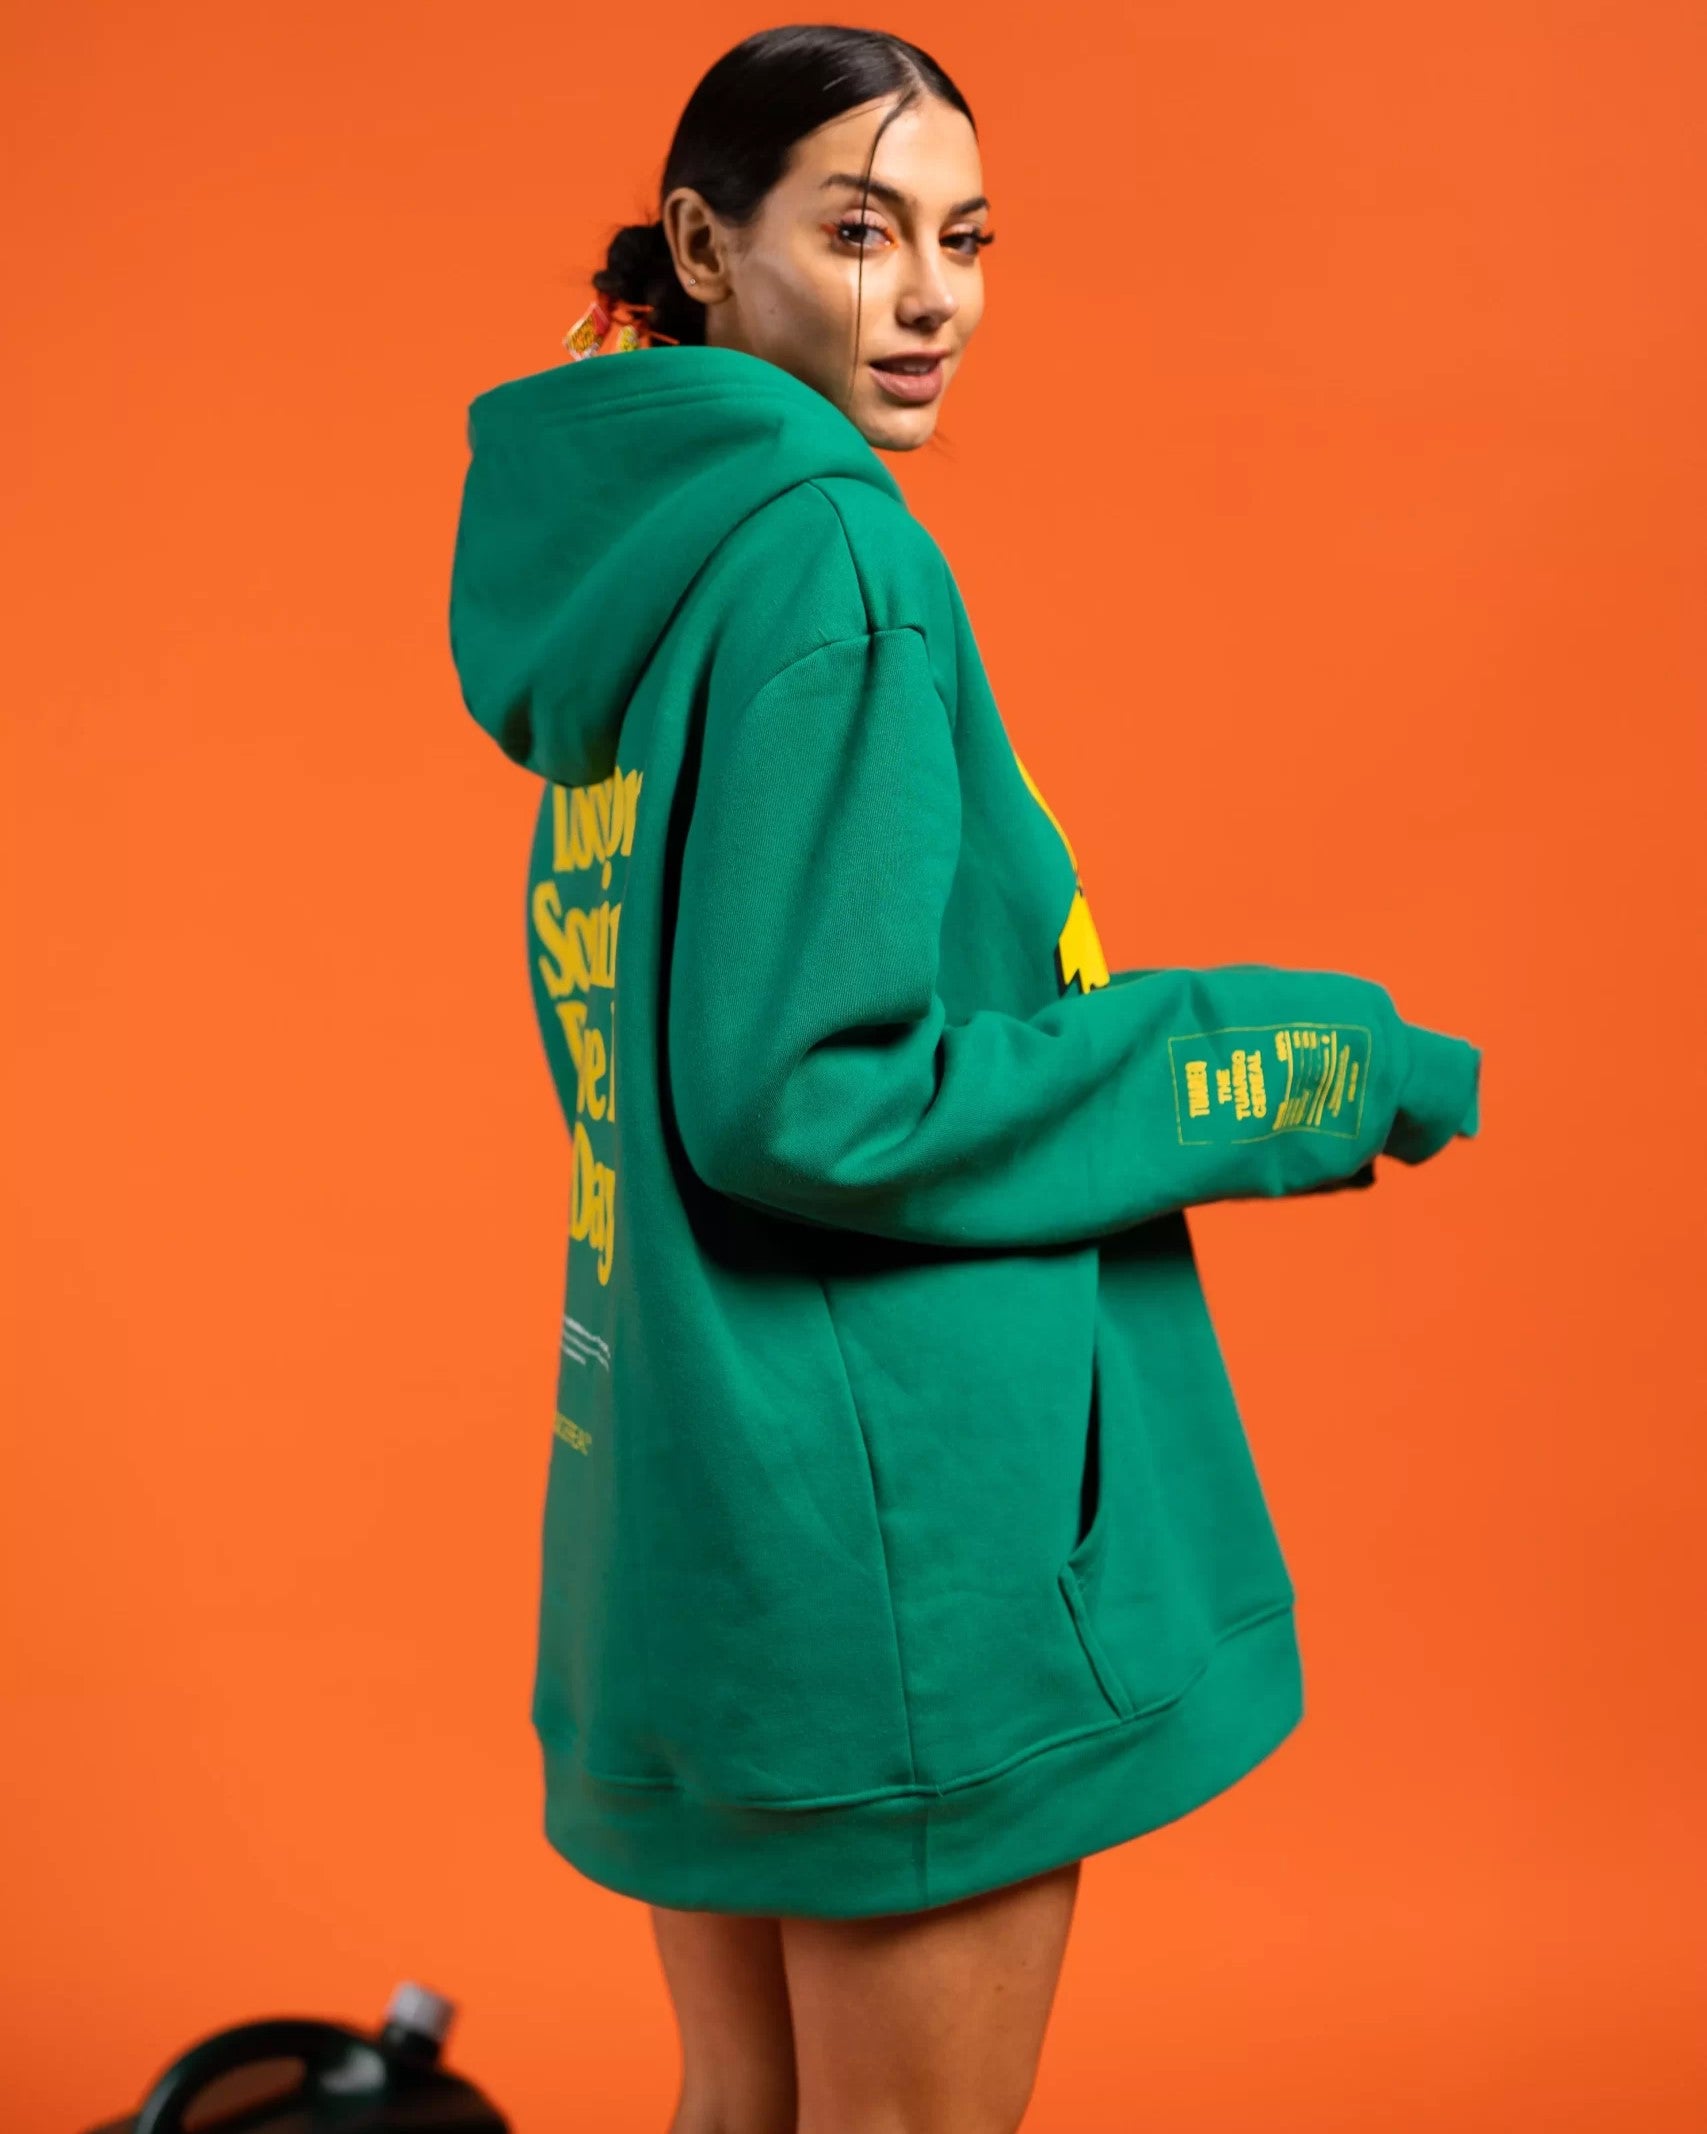 OVERSIZED HOODIE [ LUCKY CHARMS CEREALS GREEN ]